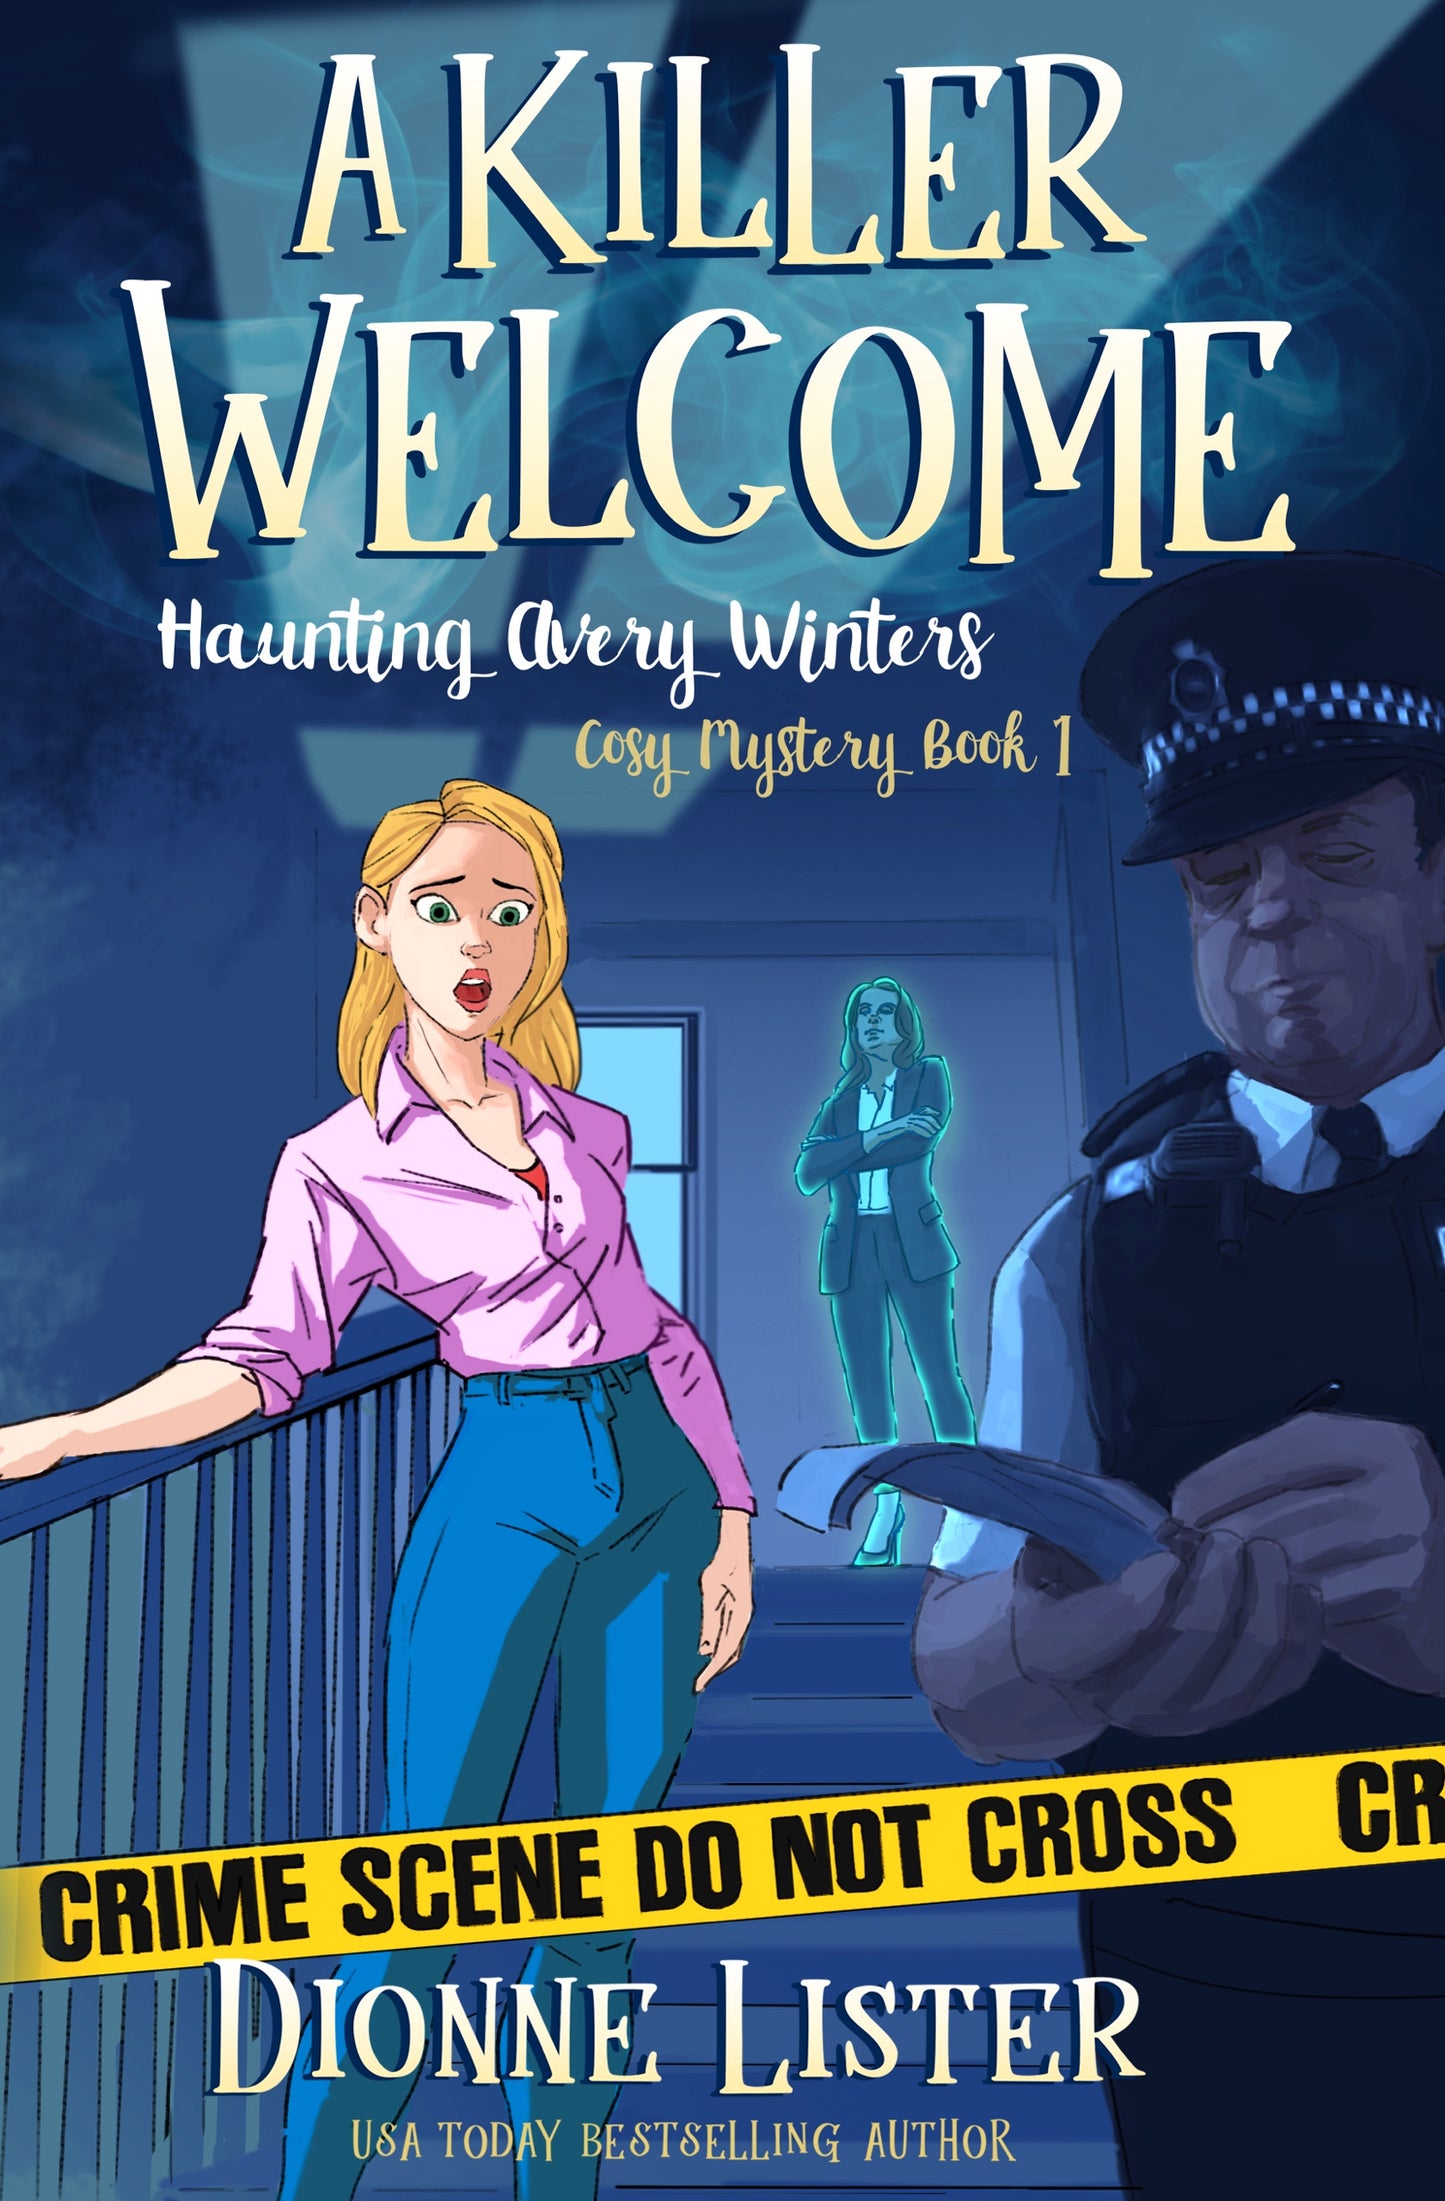 A Killer Welcome—Haunting Avery Winters Book 1